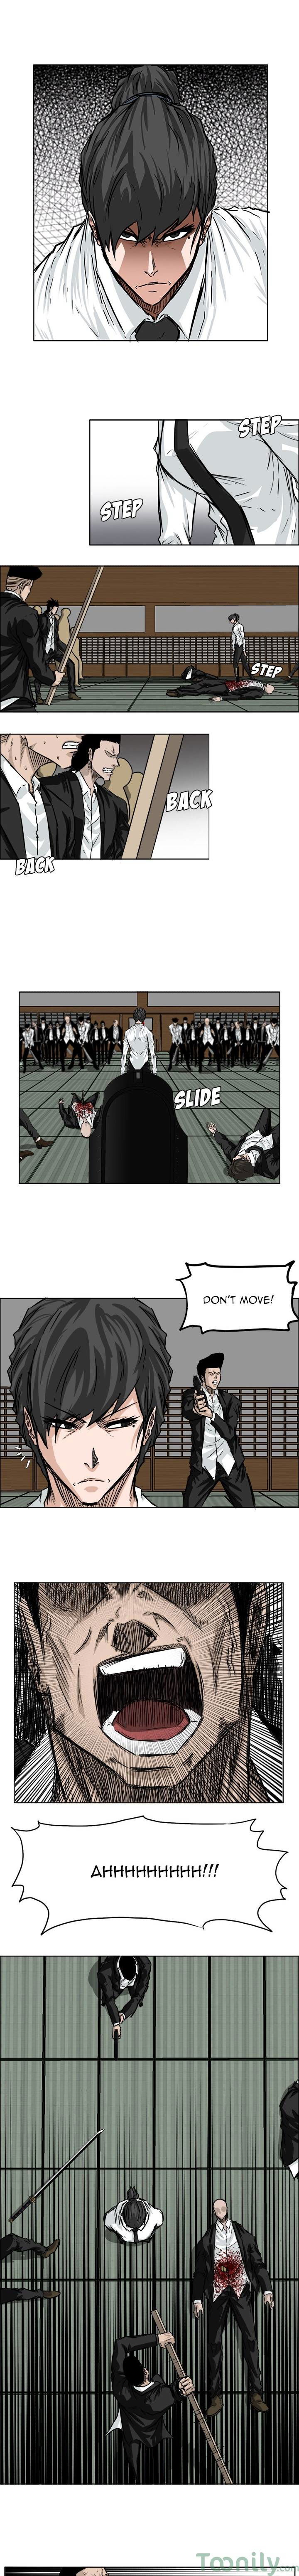 Boss in School Chapter 45 page 1